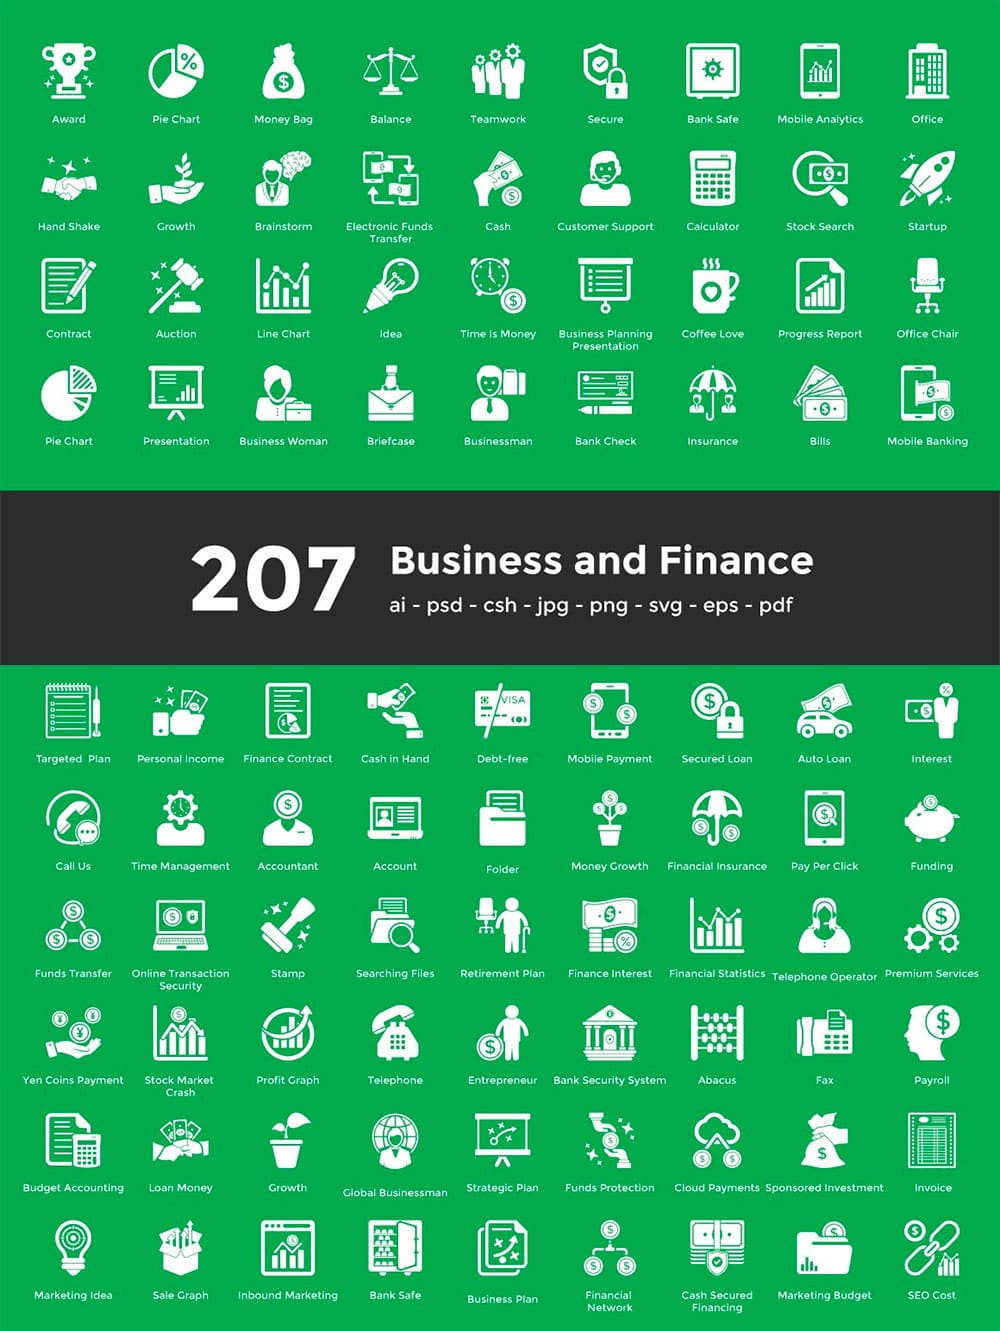 207 business and finance icons, picture for pinterest.